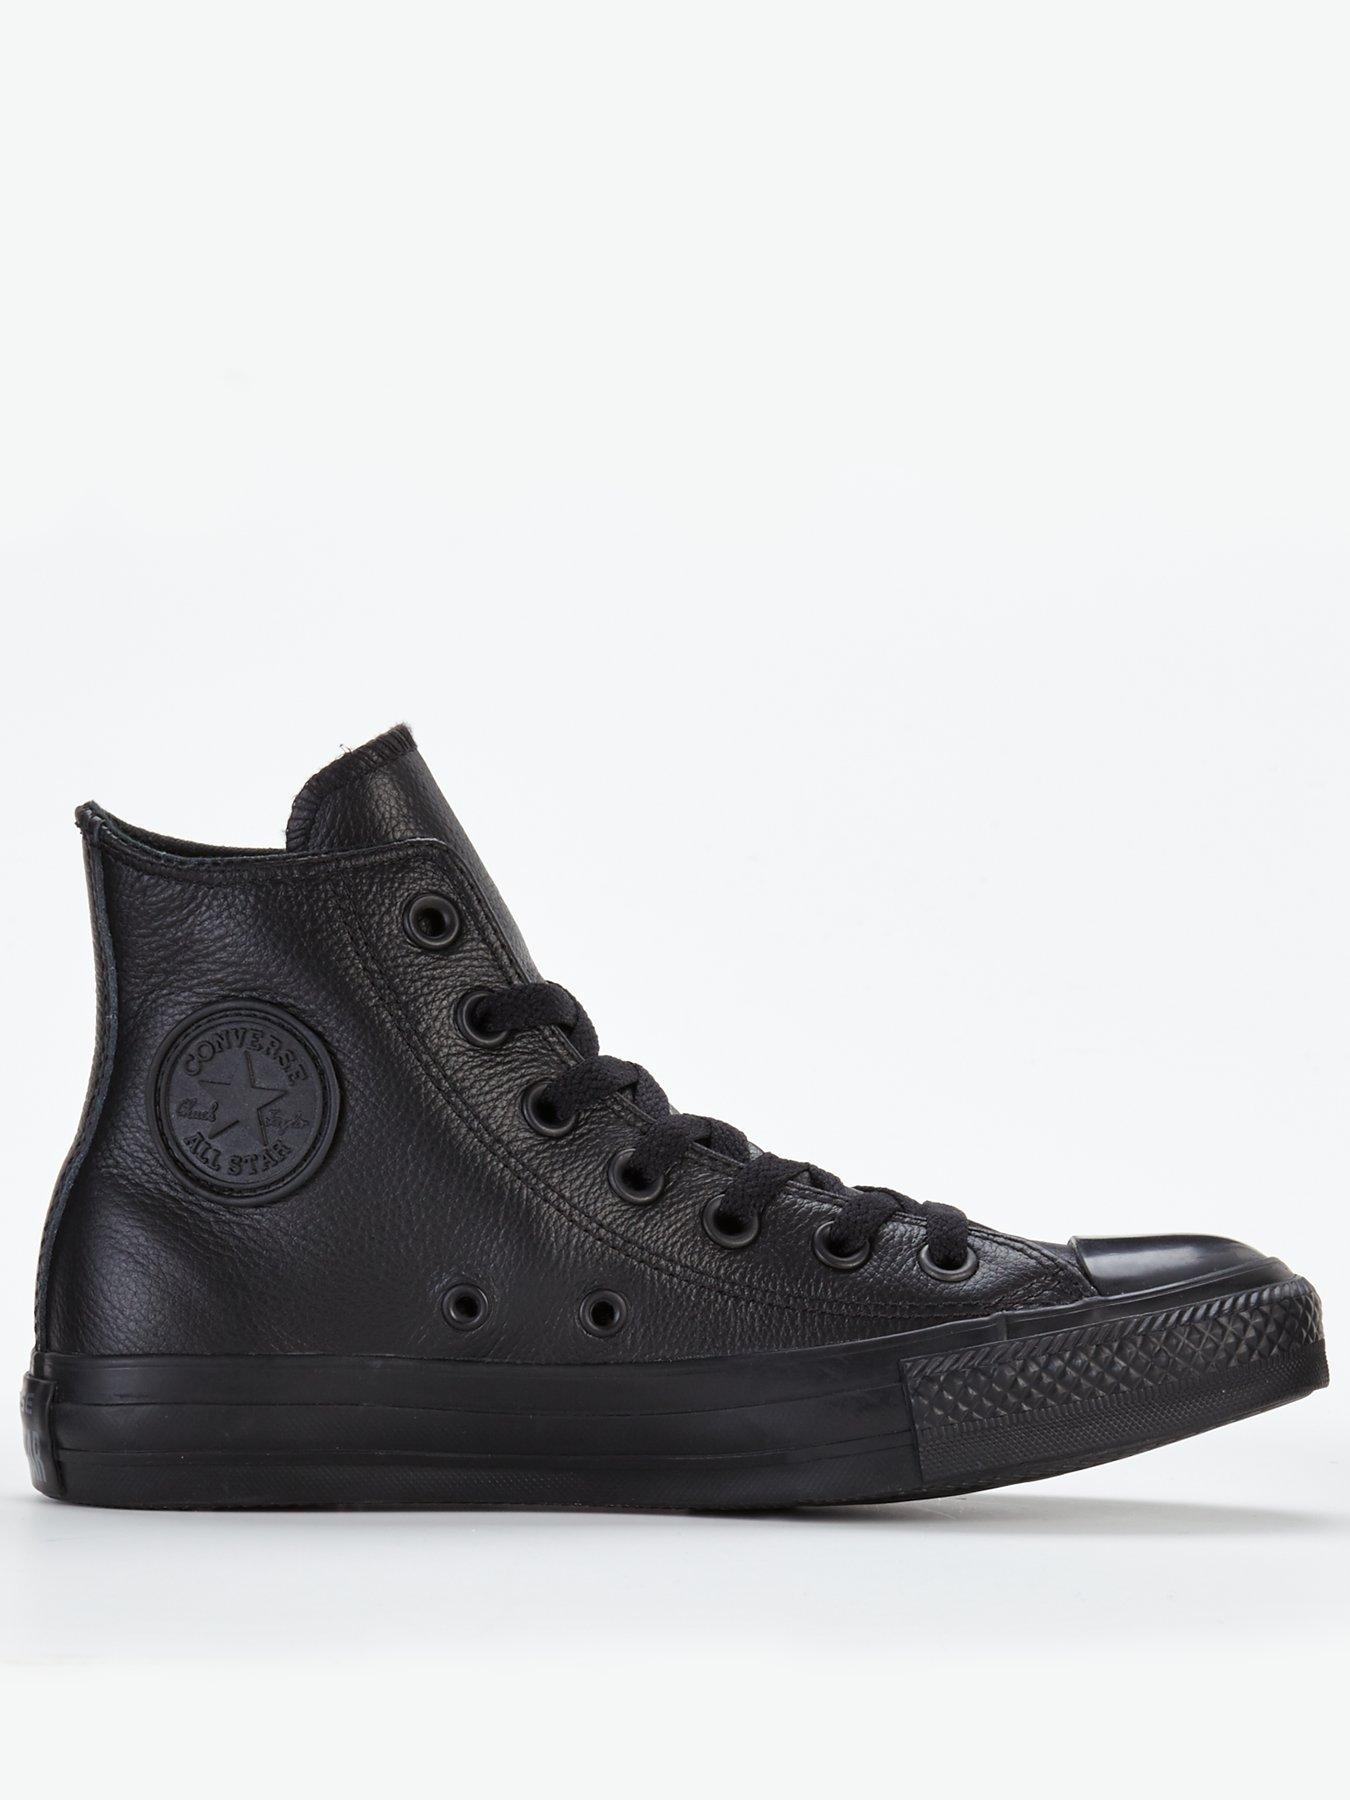 Women's Leather Converse Trainers | Black | Very.co.uk